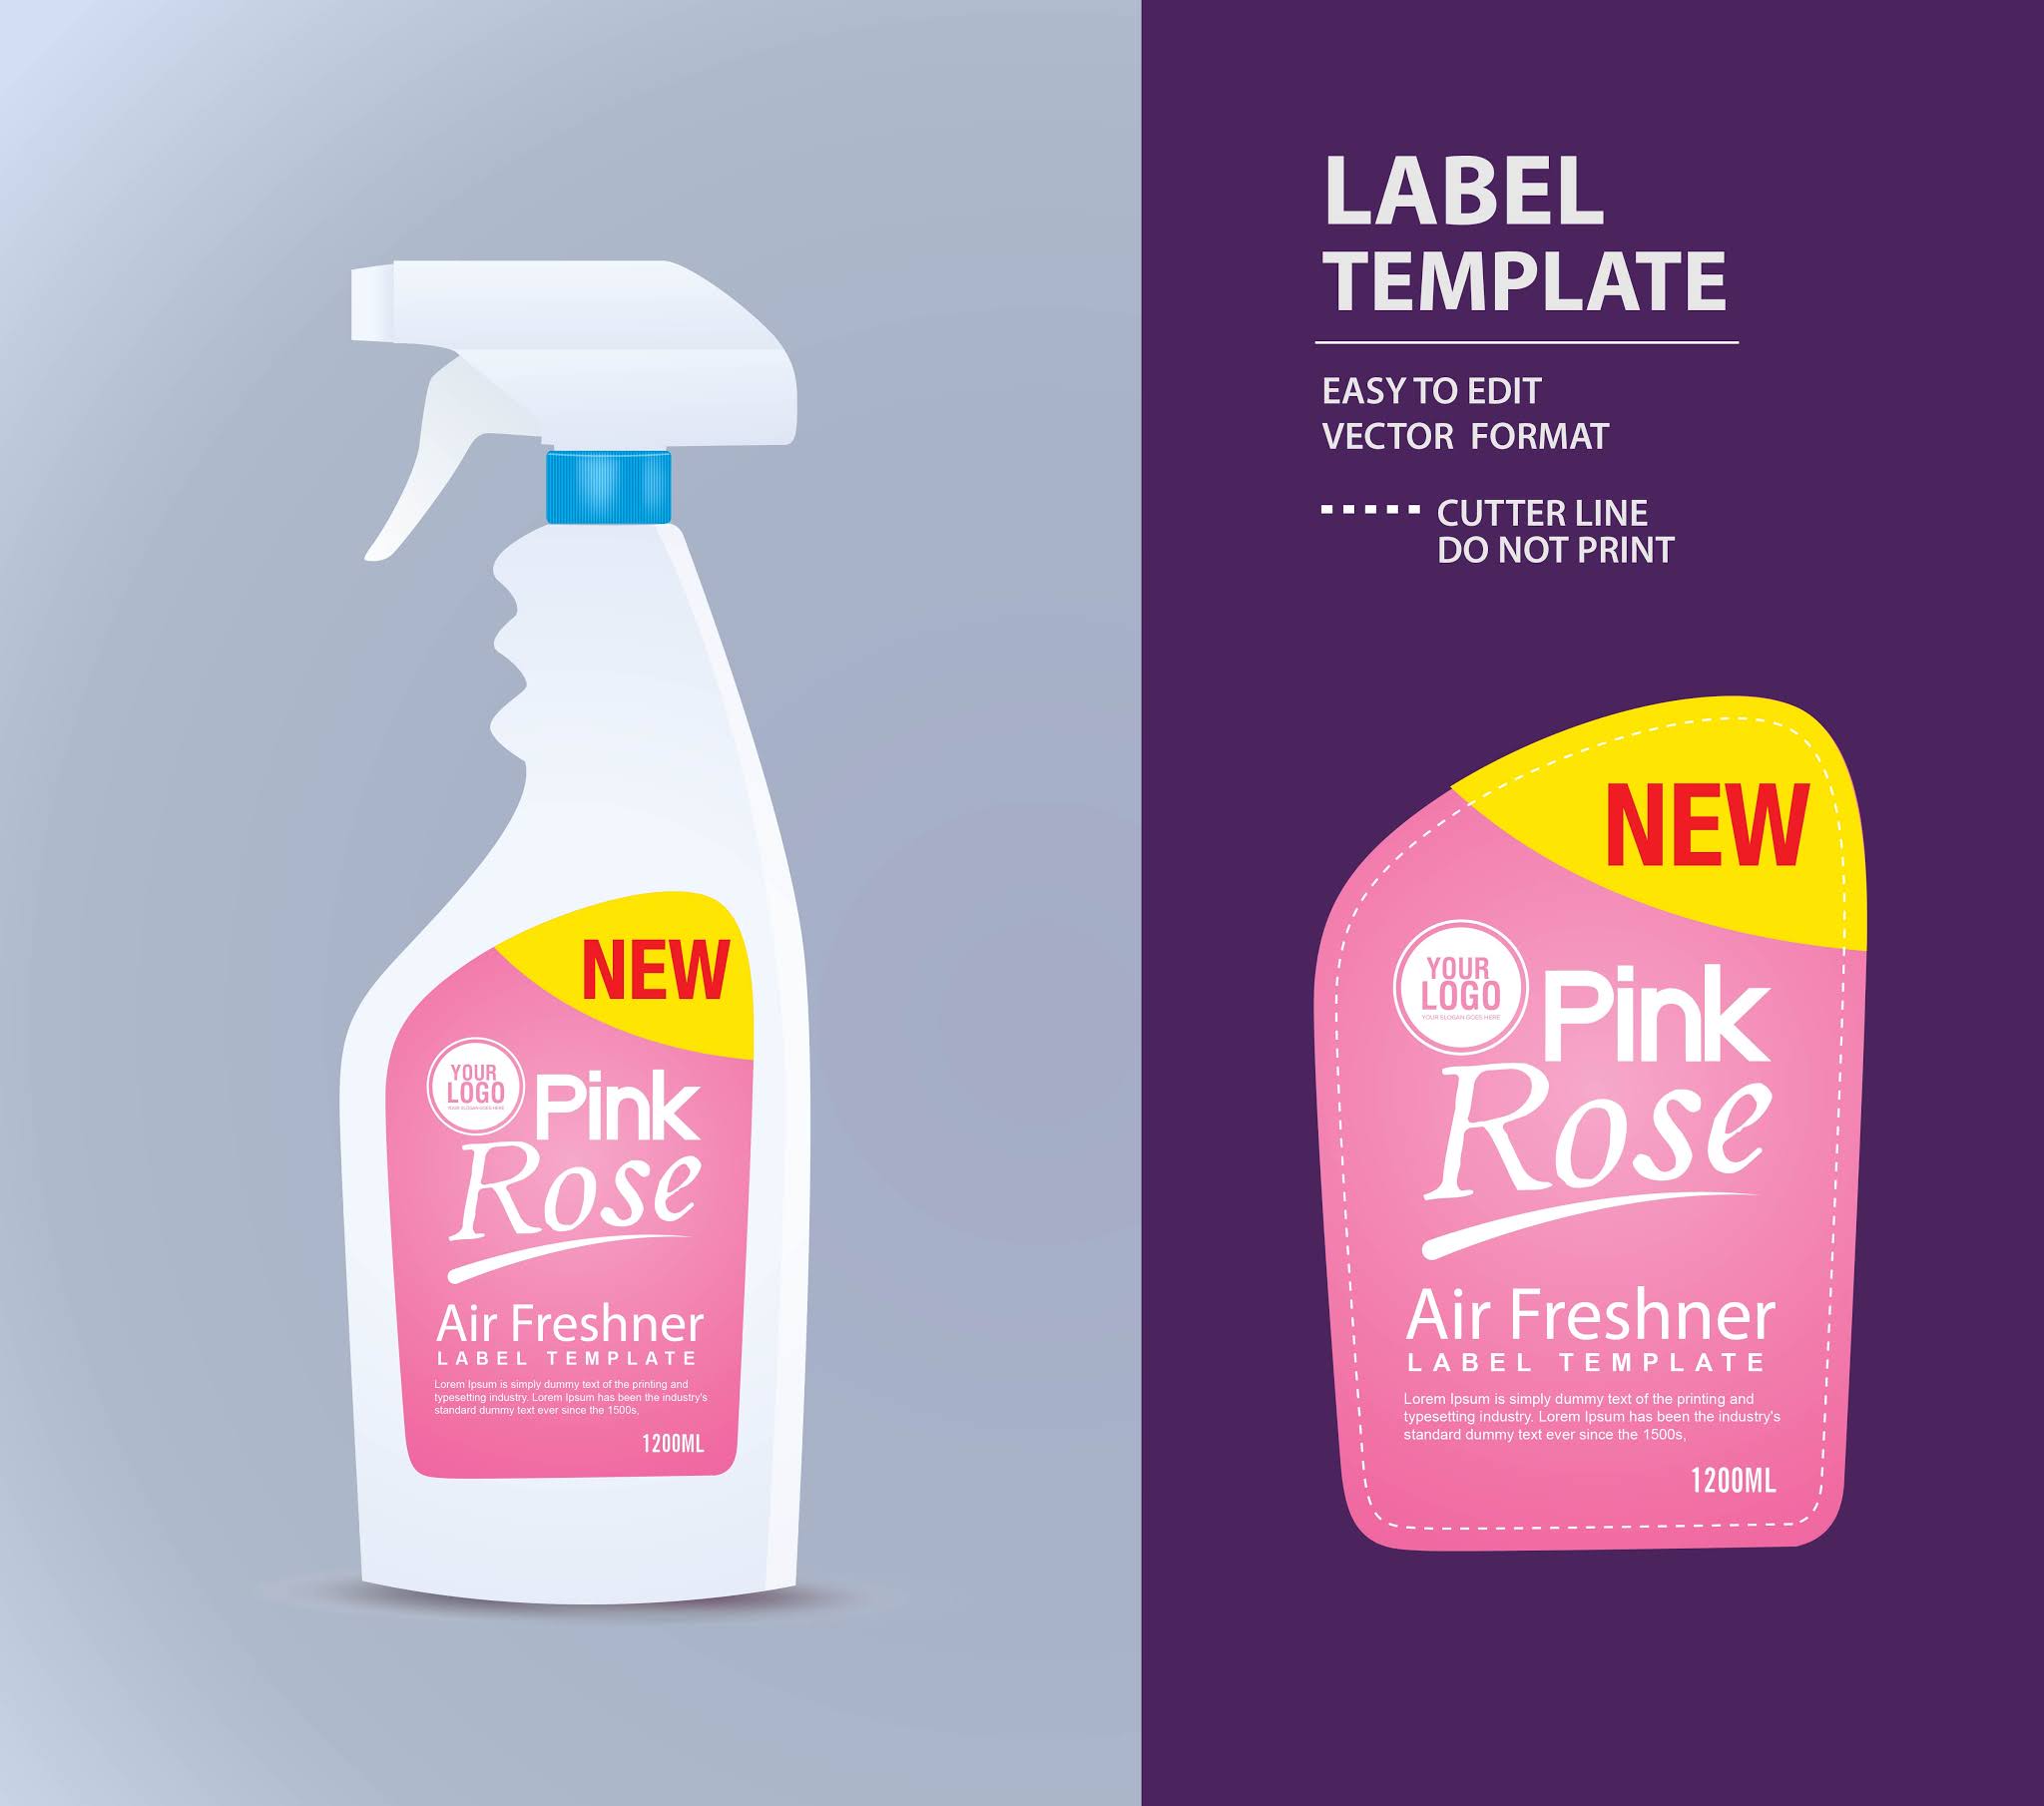 Detergent product designs stickers cleaning products in vector eps format